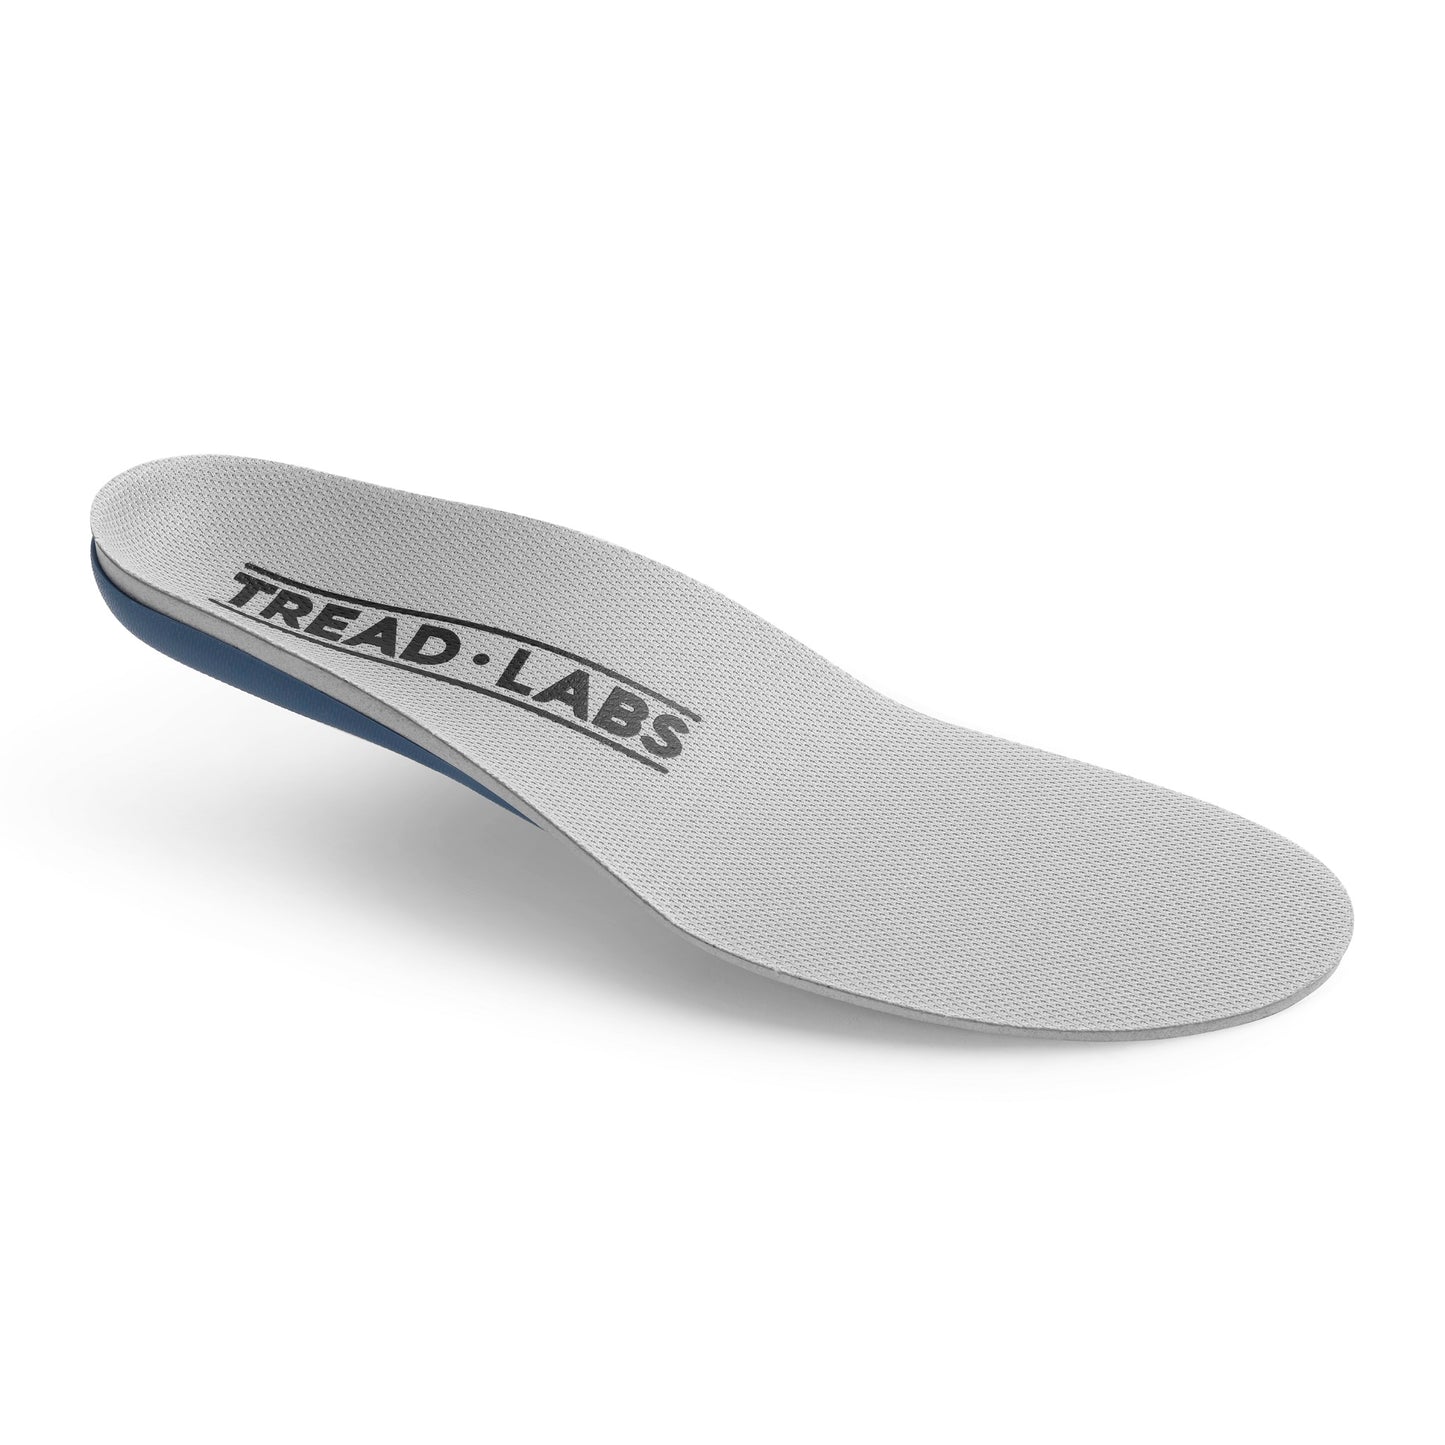 Pace refurbished orthotic inserts by Tread Labs